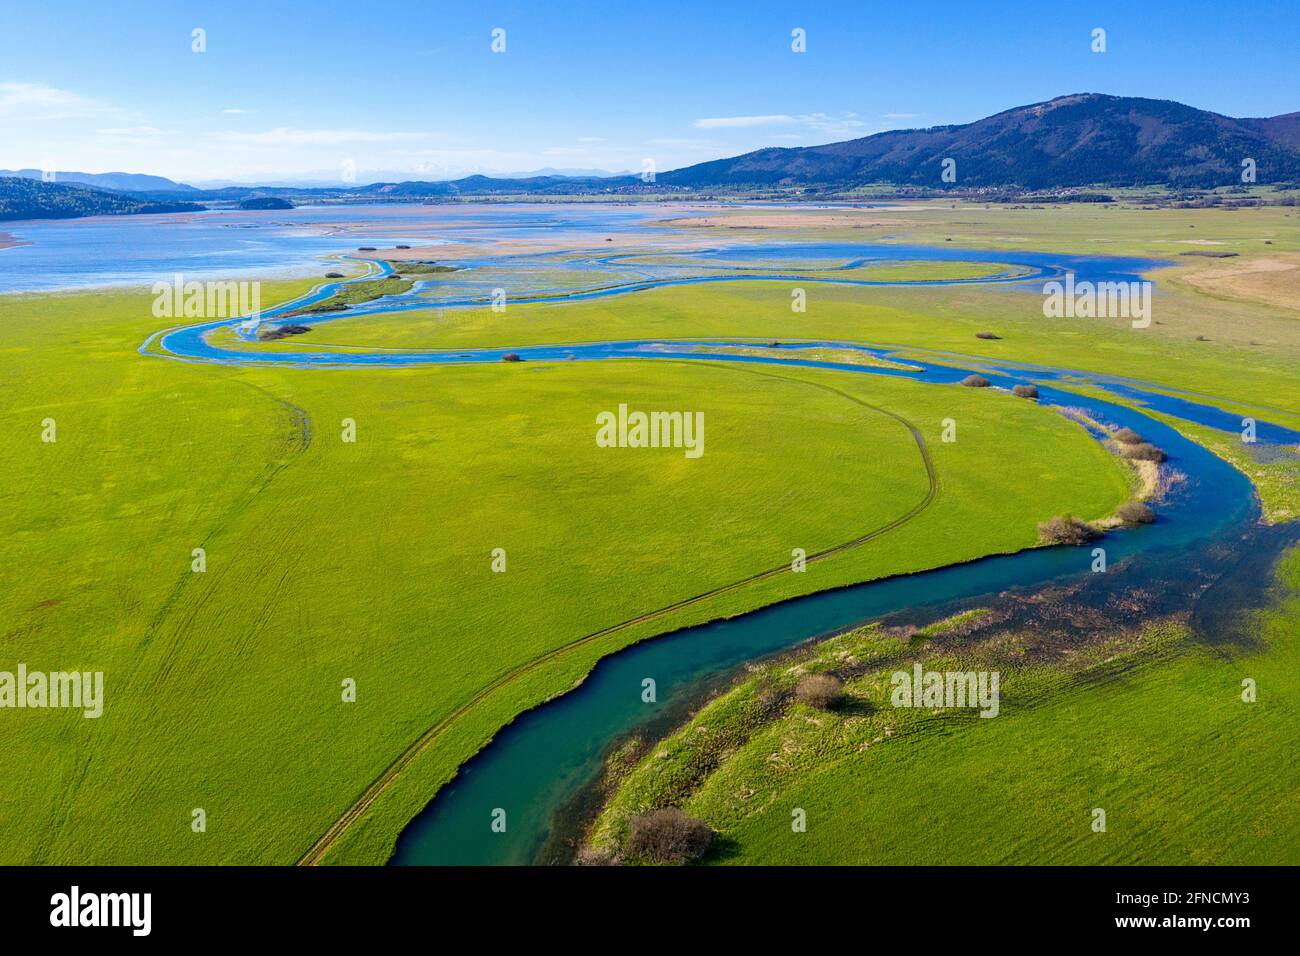 Top aerial view of tributary that flows into Cerknica Lake, taken by drone, Slovenia Stock Photo